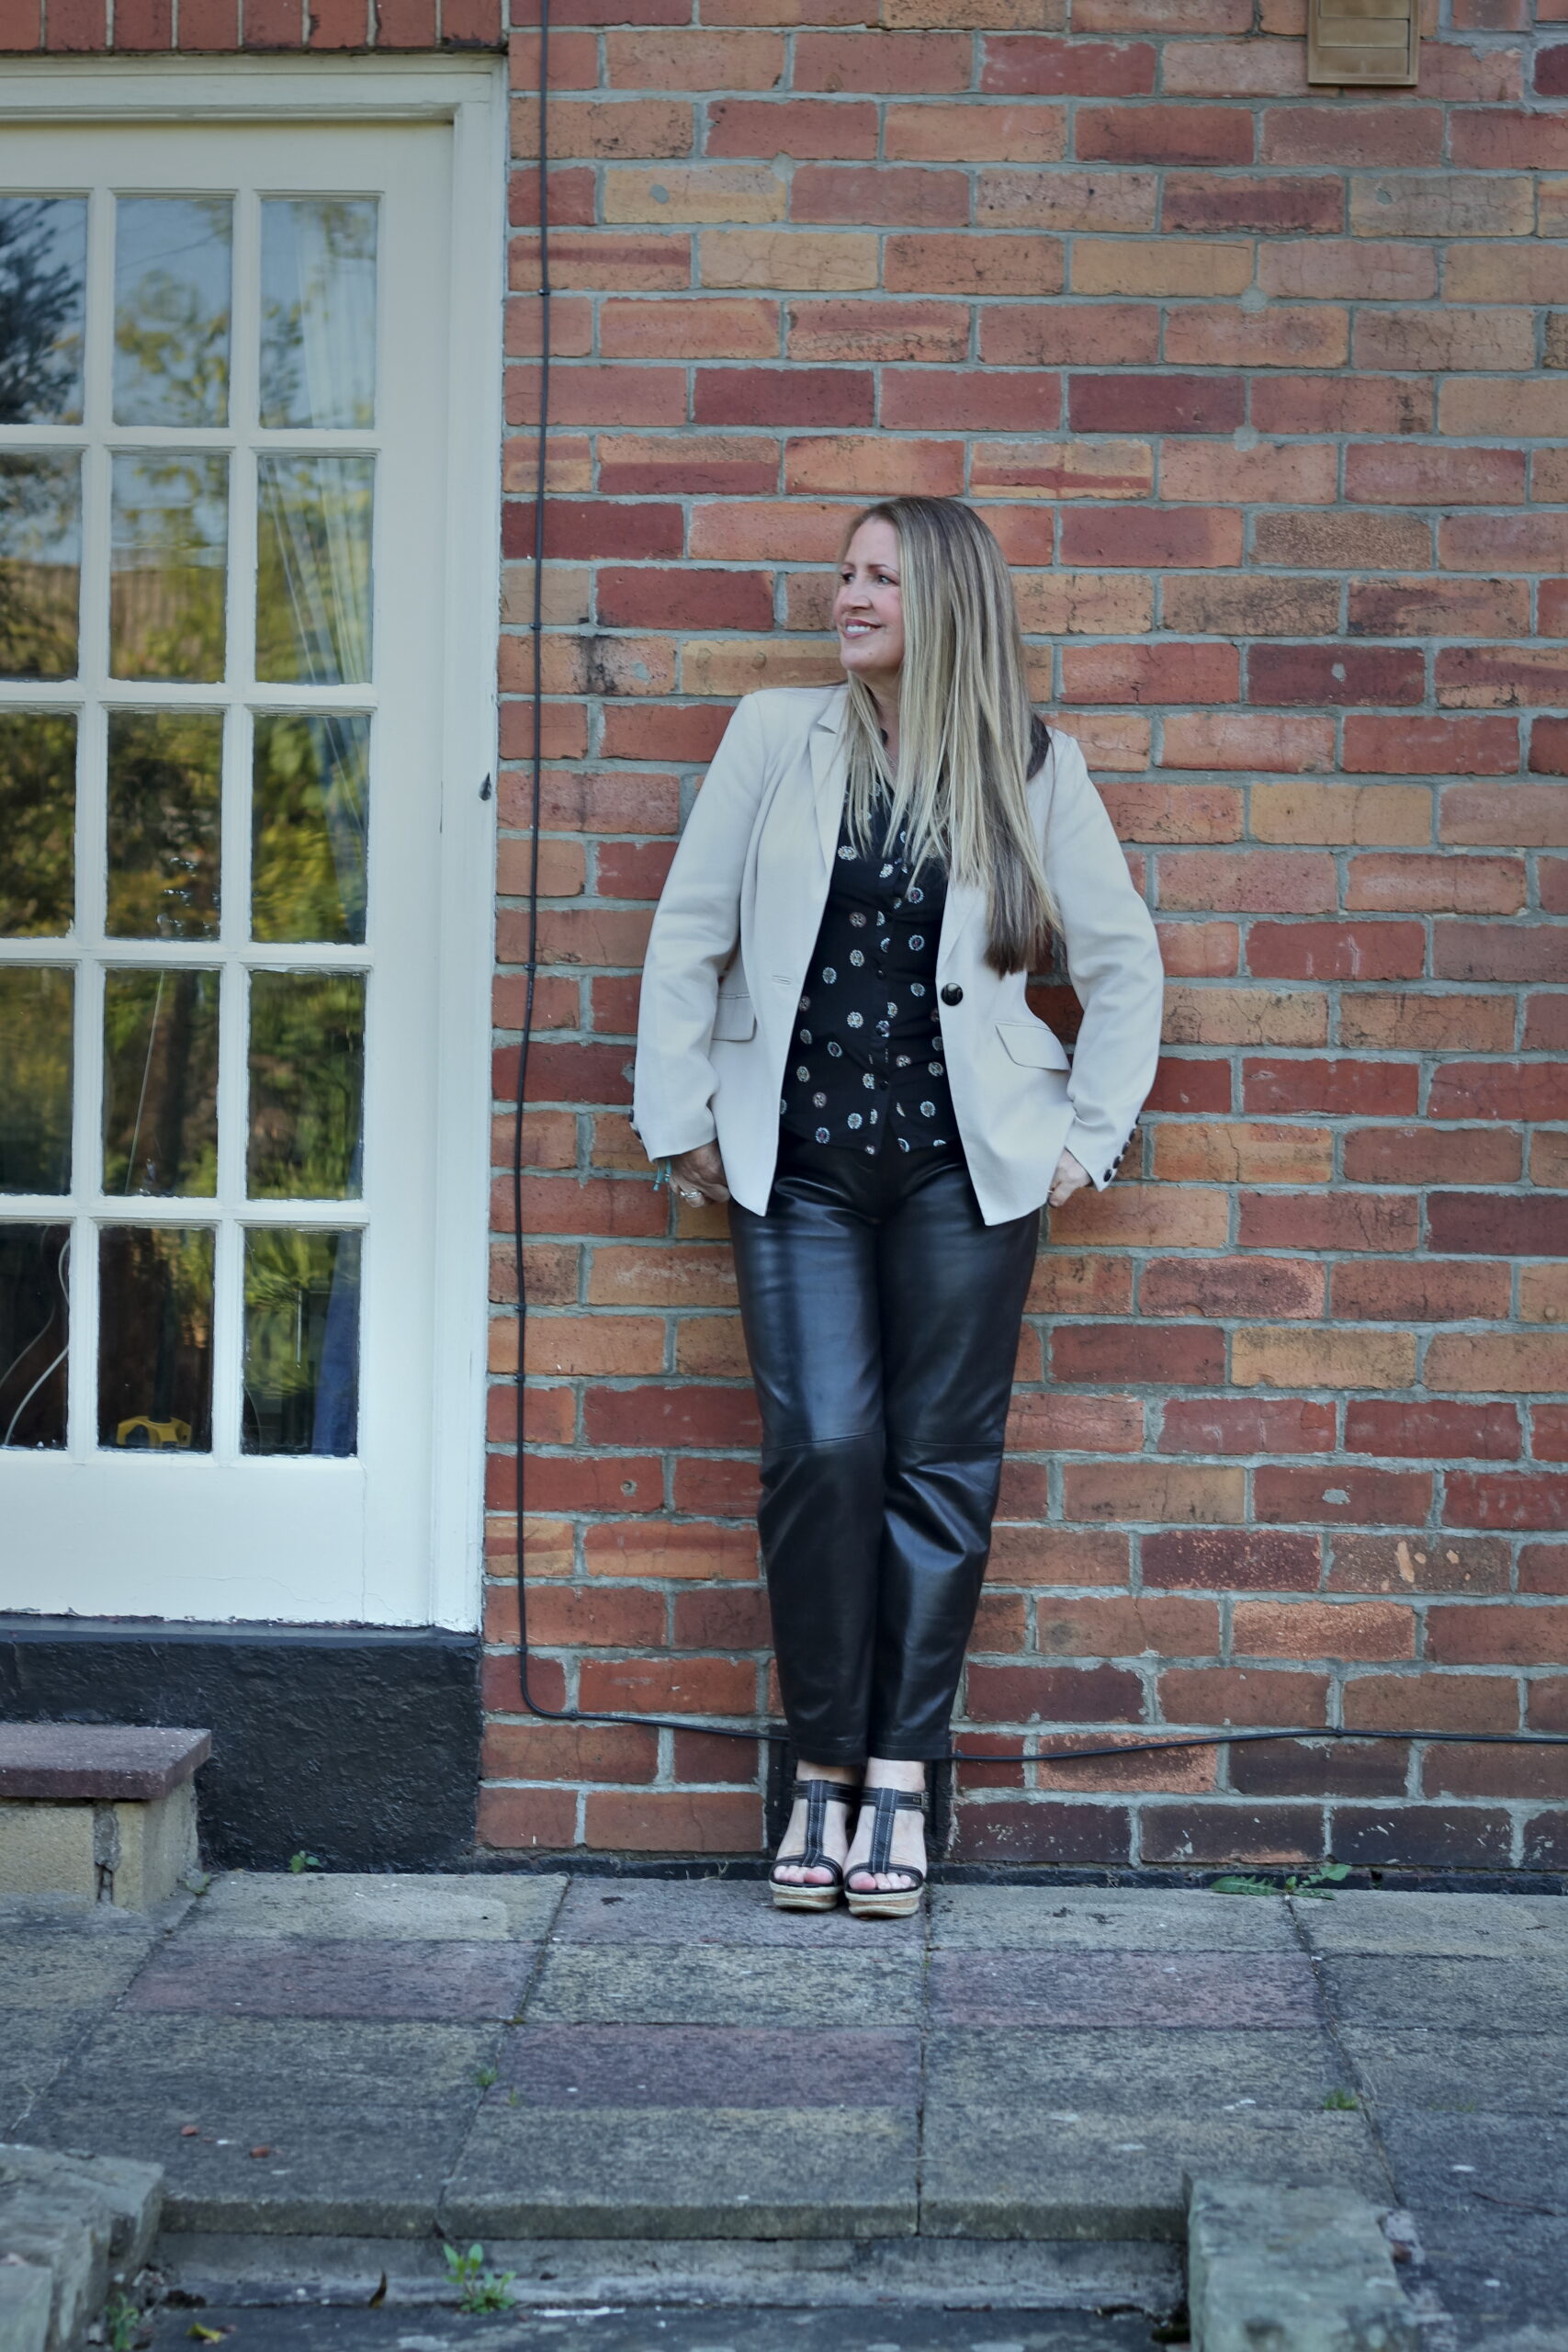 Leather Trousers, Why Not? - Midlife and Beyond